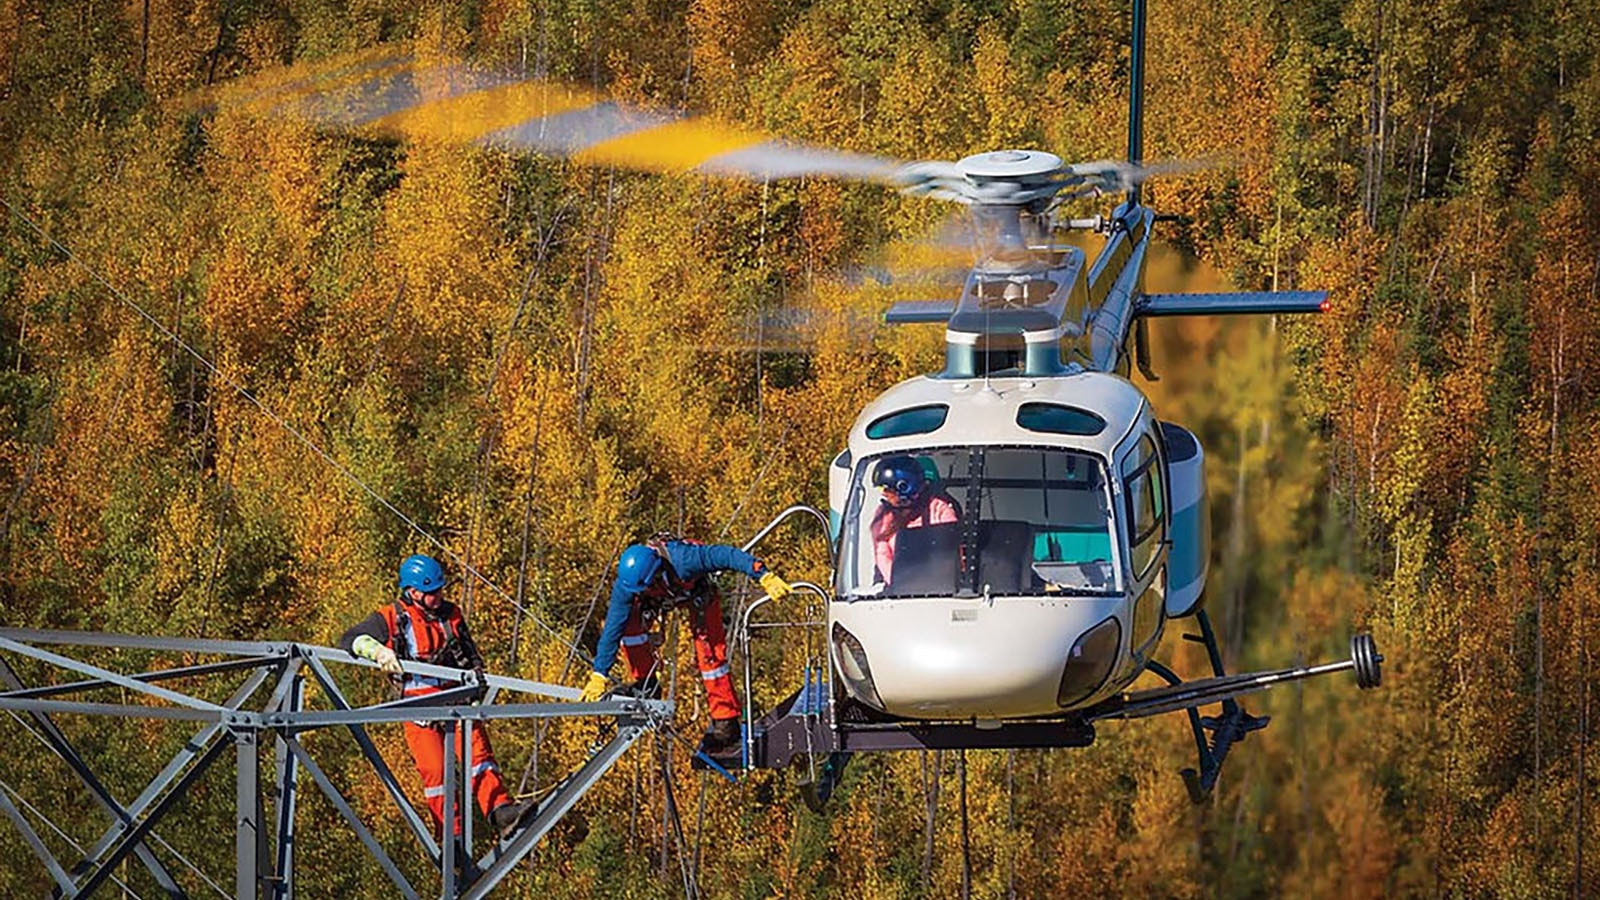 Servicing power lines from a helicopter is crazy dangerous work, and those who do it make crazy high salaries.